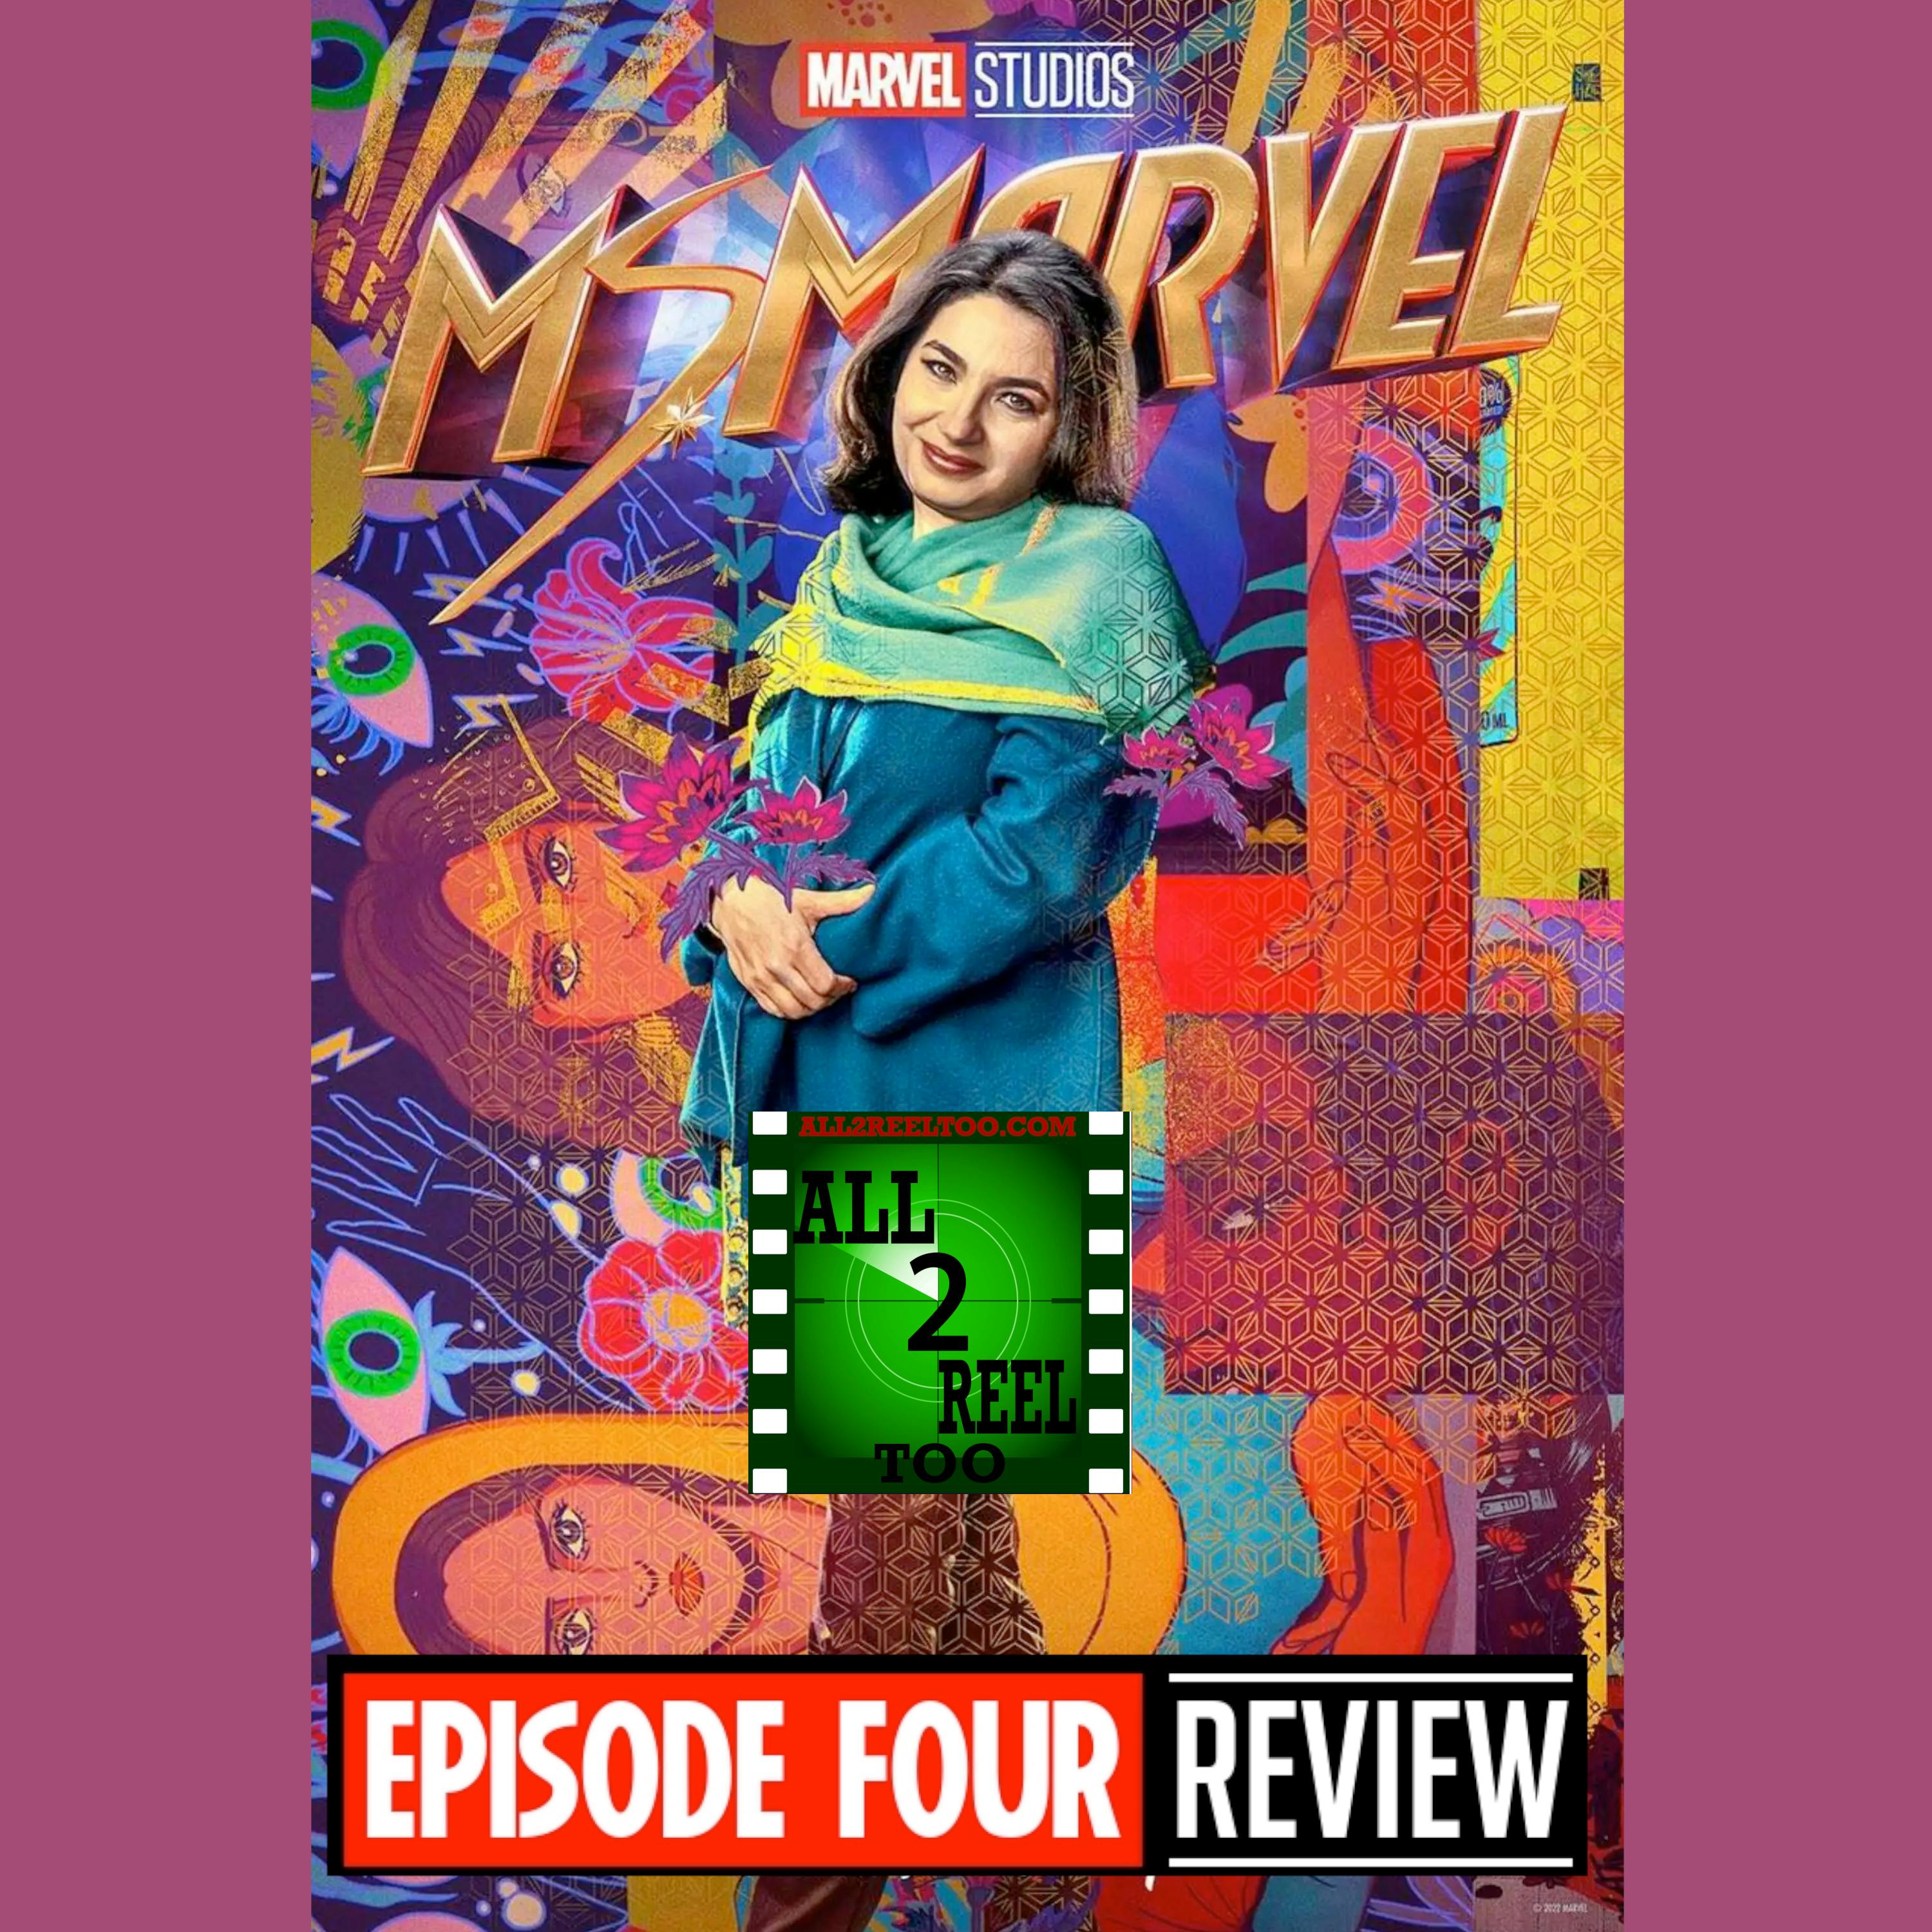 Ms. Marvel EPISODE 4 REVIEW Image